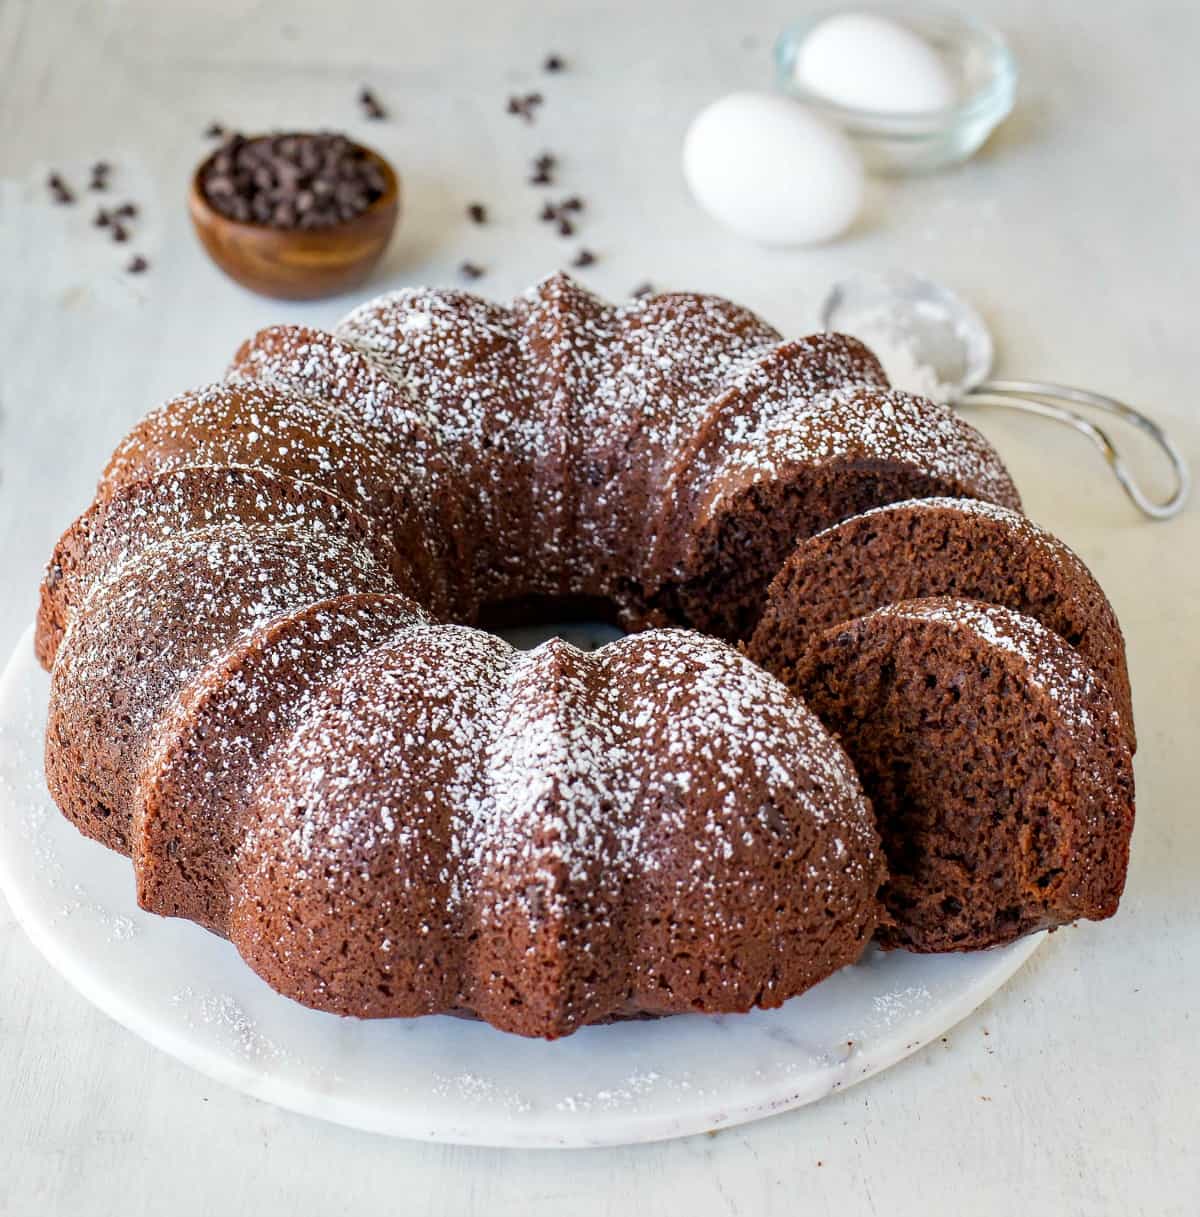 Chocolate bundt cake on a marble tray next to a bowl of chocolate chips